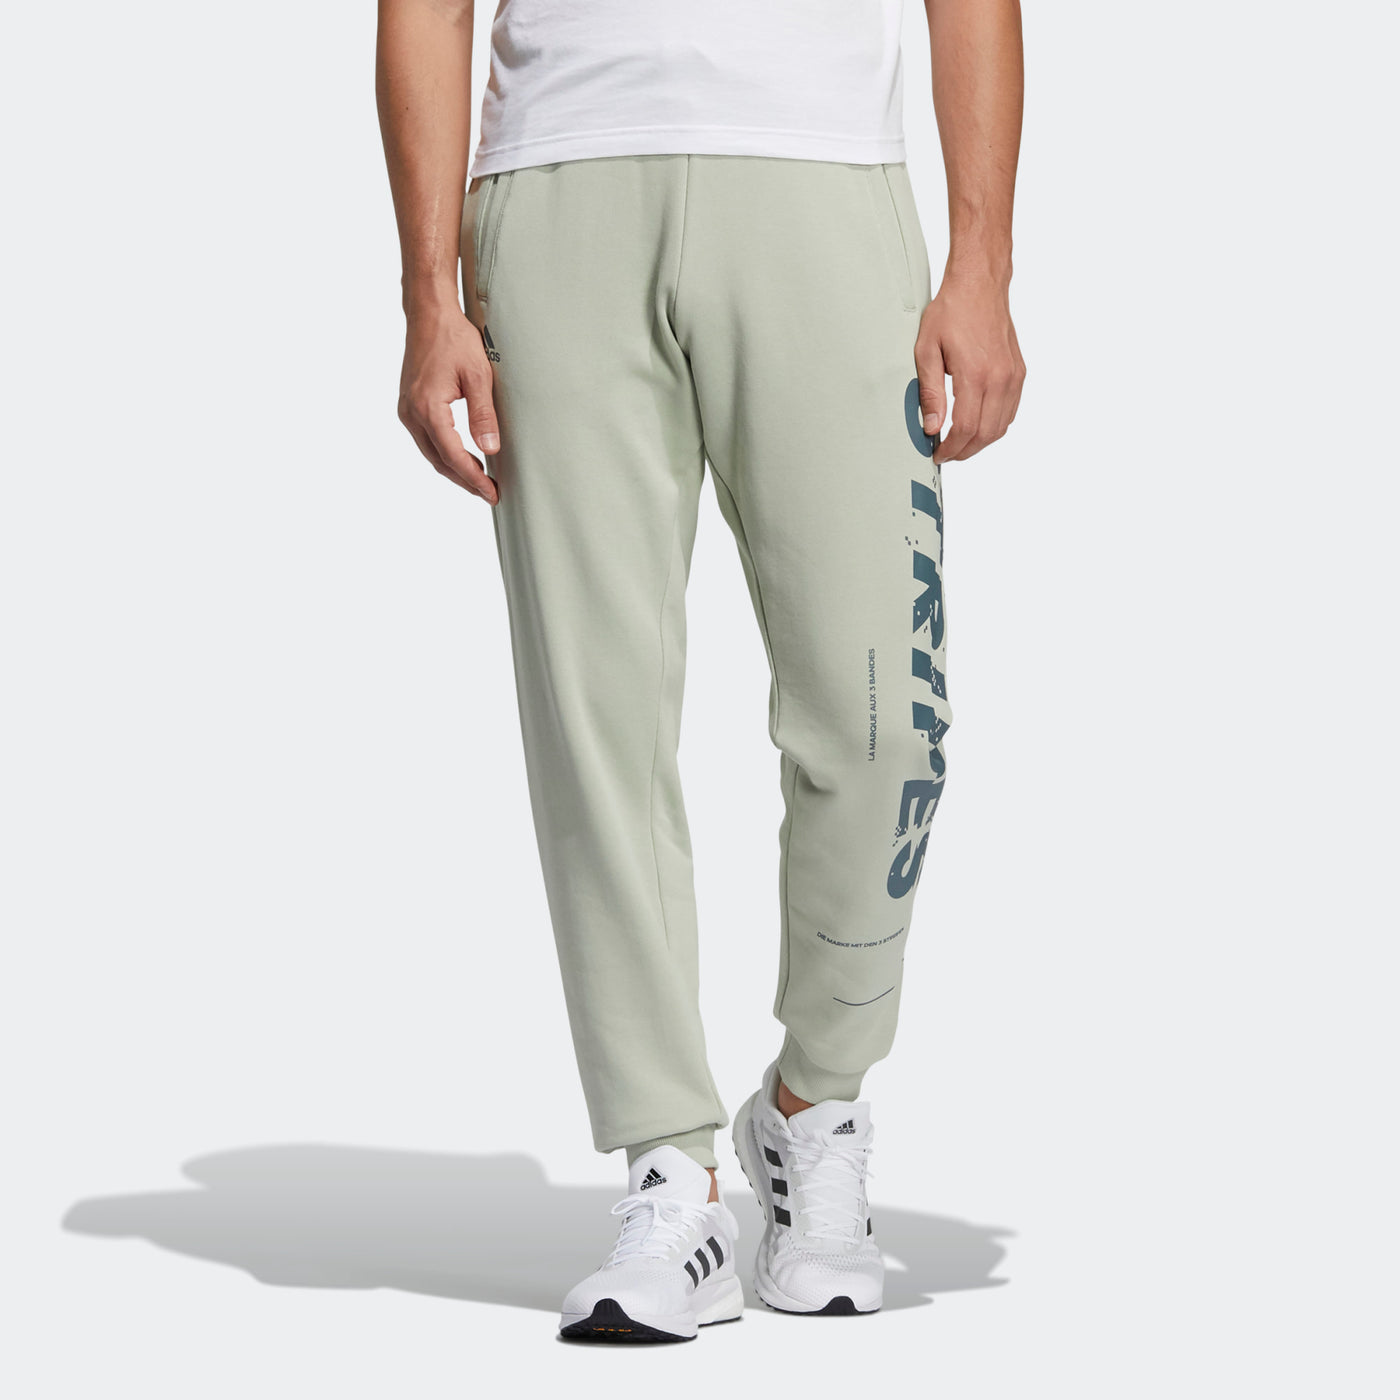 Buy ADIDAS Mens Track Pants  Shoppers Stop